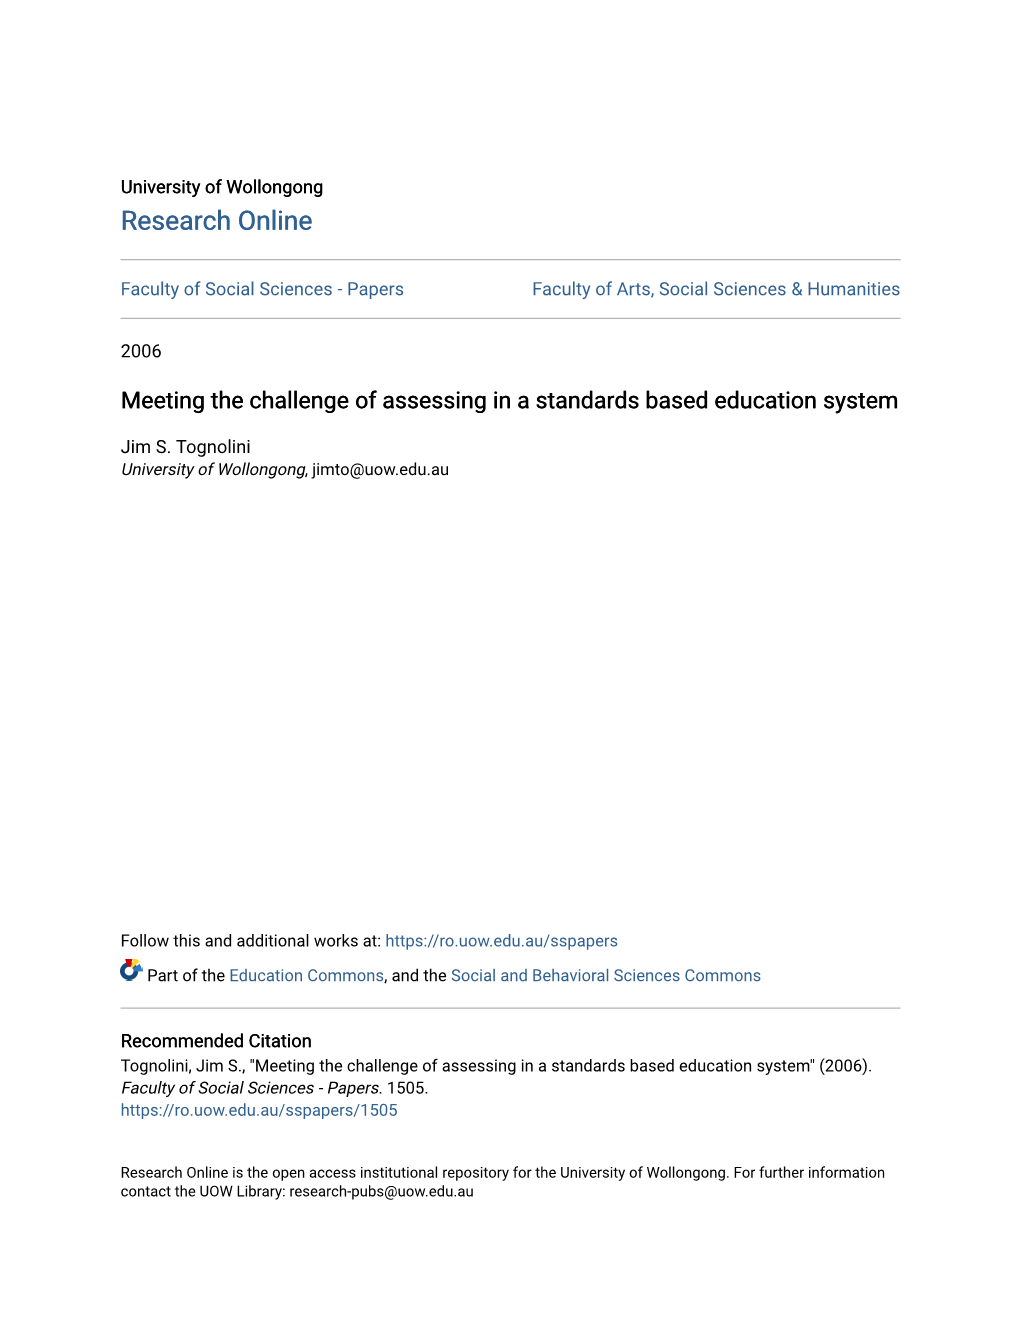 Meeting the Challenge of Assessing in a Standards Based Education System